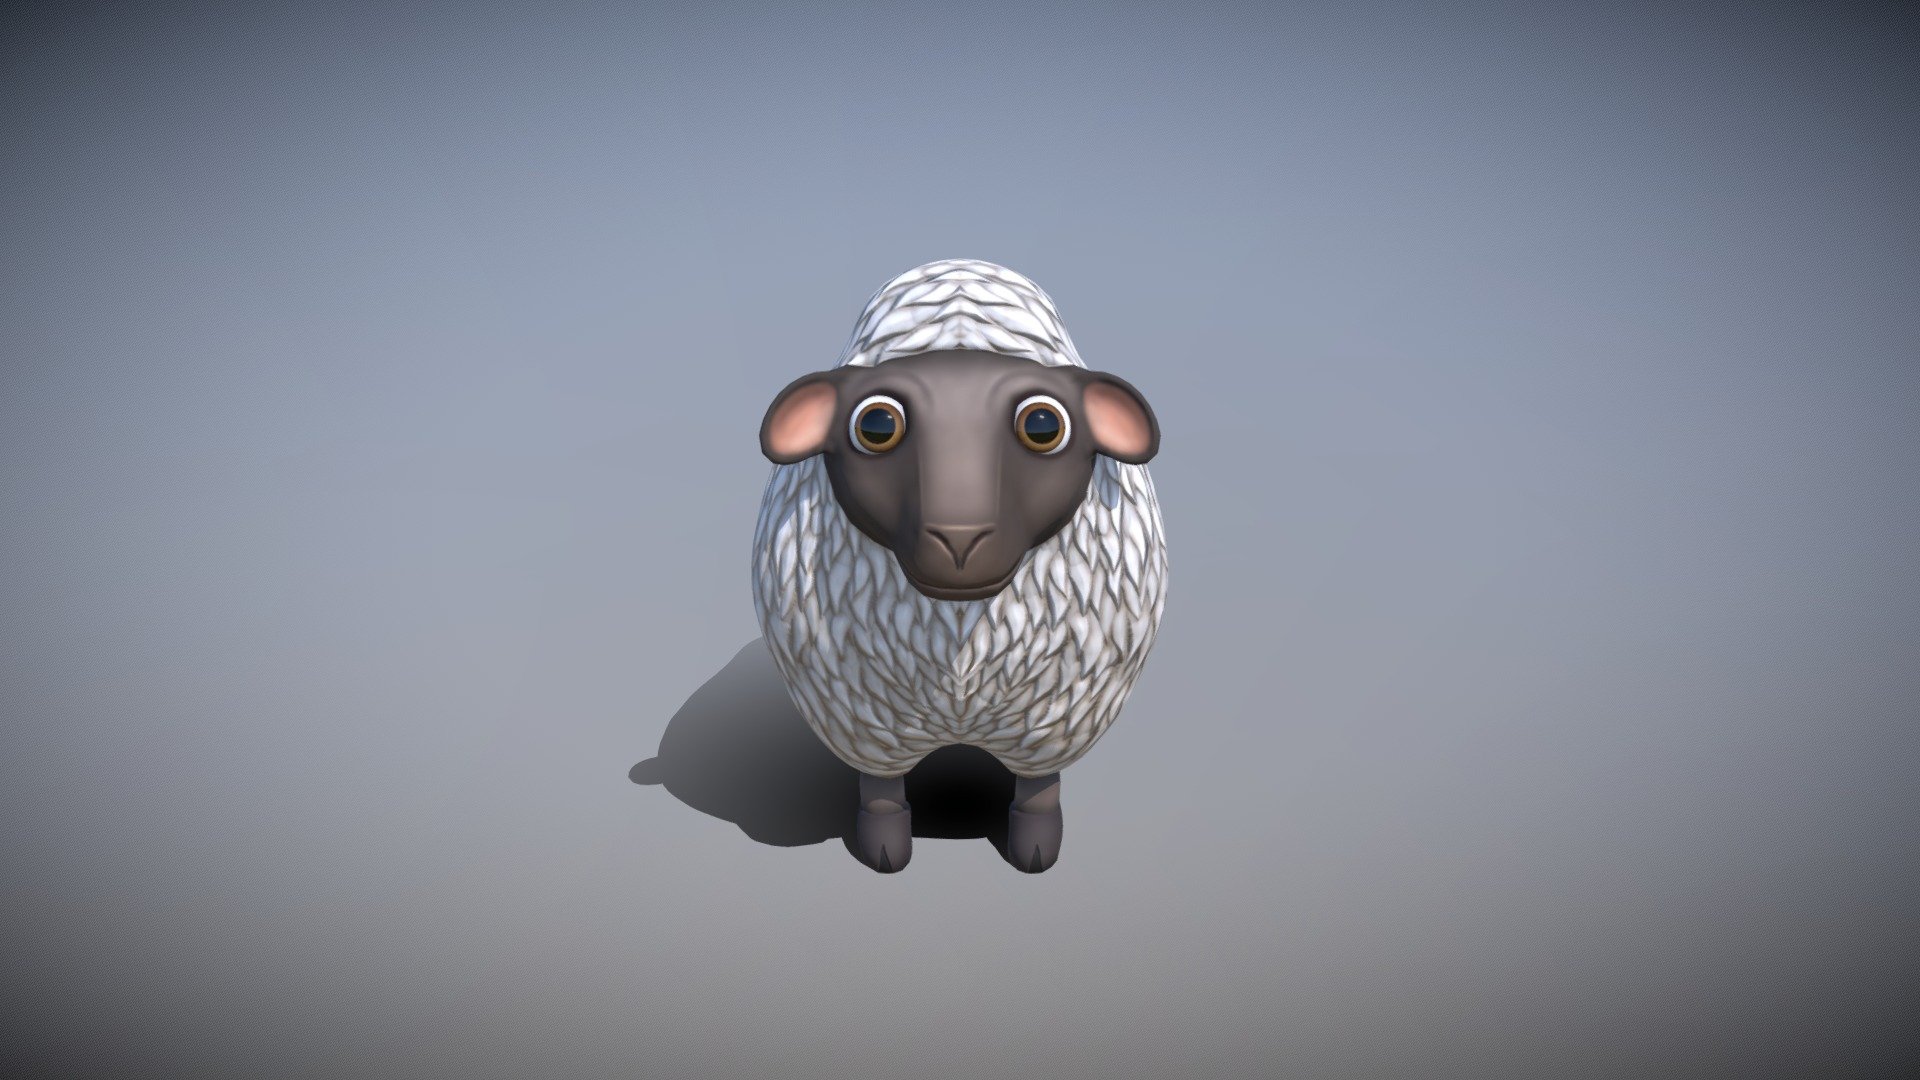 Cartoon Sheep 3D model is completely ready to be used in your games, animations, films, designs etc.

All textures and materials are included and mapped in every format. The model is completely ready for use visualization in any 3d software and engine.

Technical details:




A transparency map is included for the glass material. White color is glass, black is nonglass(can be inverted if needed).

File formats included in the package are: FBX, OBJ, GLB, ABC, PLY, STL, x3d, BLEND, gLTF (generated), USDZ (generated)

Native software file format: BLEND

Polygons: 5,106

Vertices: 5,084

Textures: Color, Metallic, Roughness, Normal, AO.

All textures are 2k resolution.

This model is part of the pack https://sketchfab.com/3d-models/easter-3d-model-51757fe114f942339e6e50a50b43d5ce

Buying the model from the pack will save you 25% (compared to purchasing all models separately) 3d model